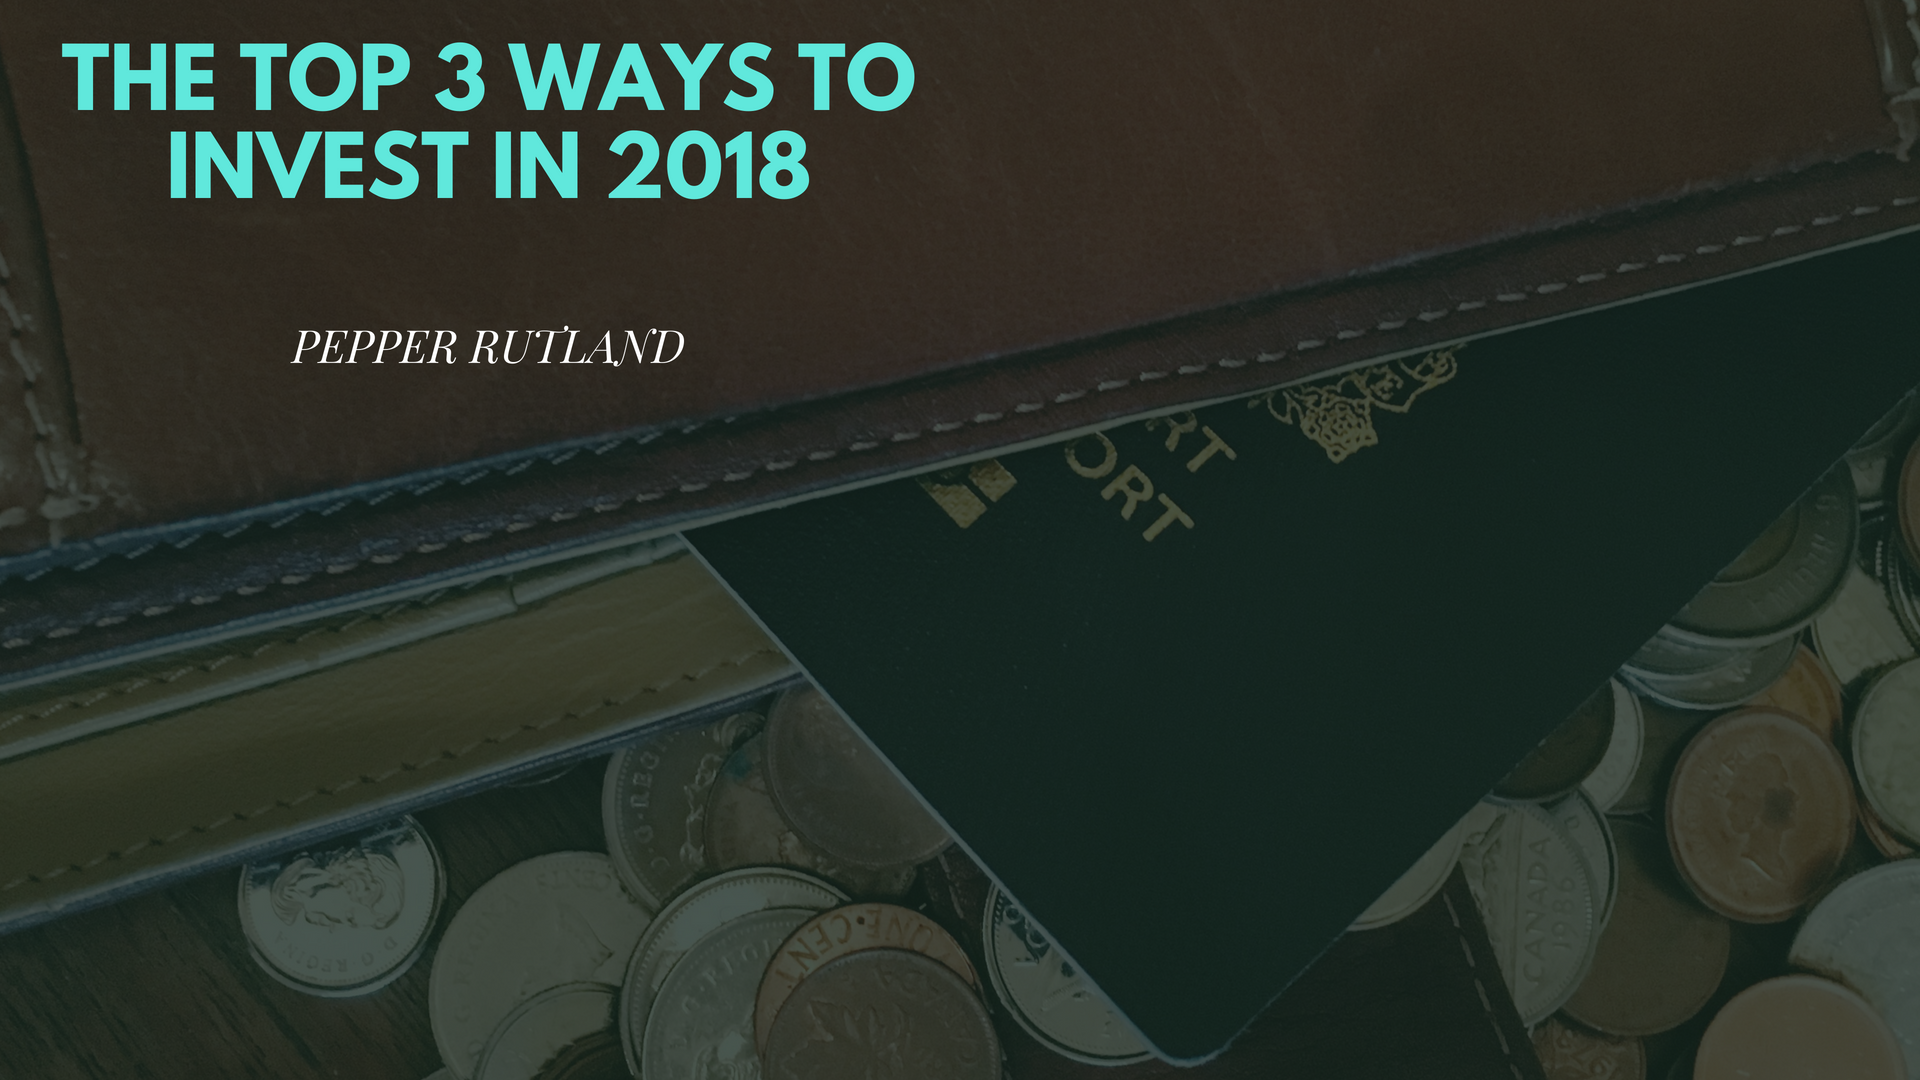 The Top 3 Ways to Invest in 2018